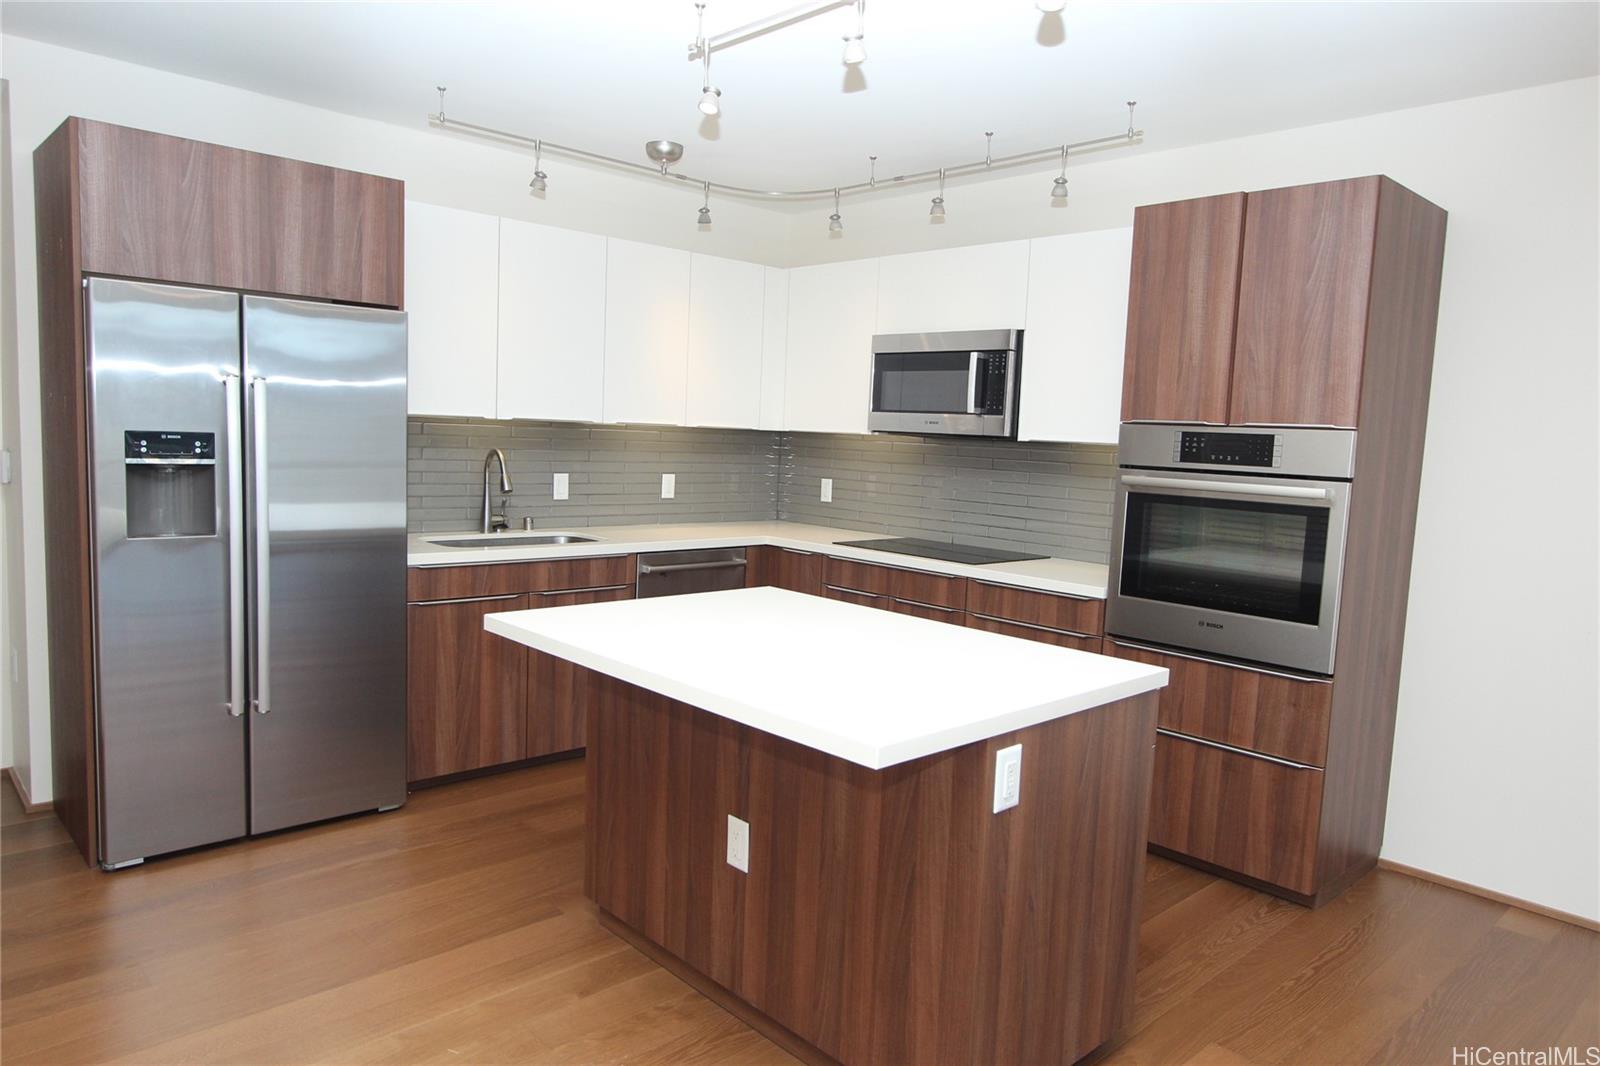 a kitchen with kitchen island a counter top space cabinets and stainless steel appliances